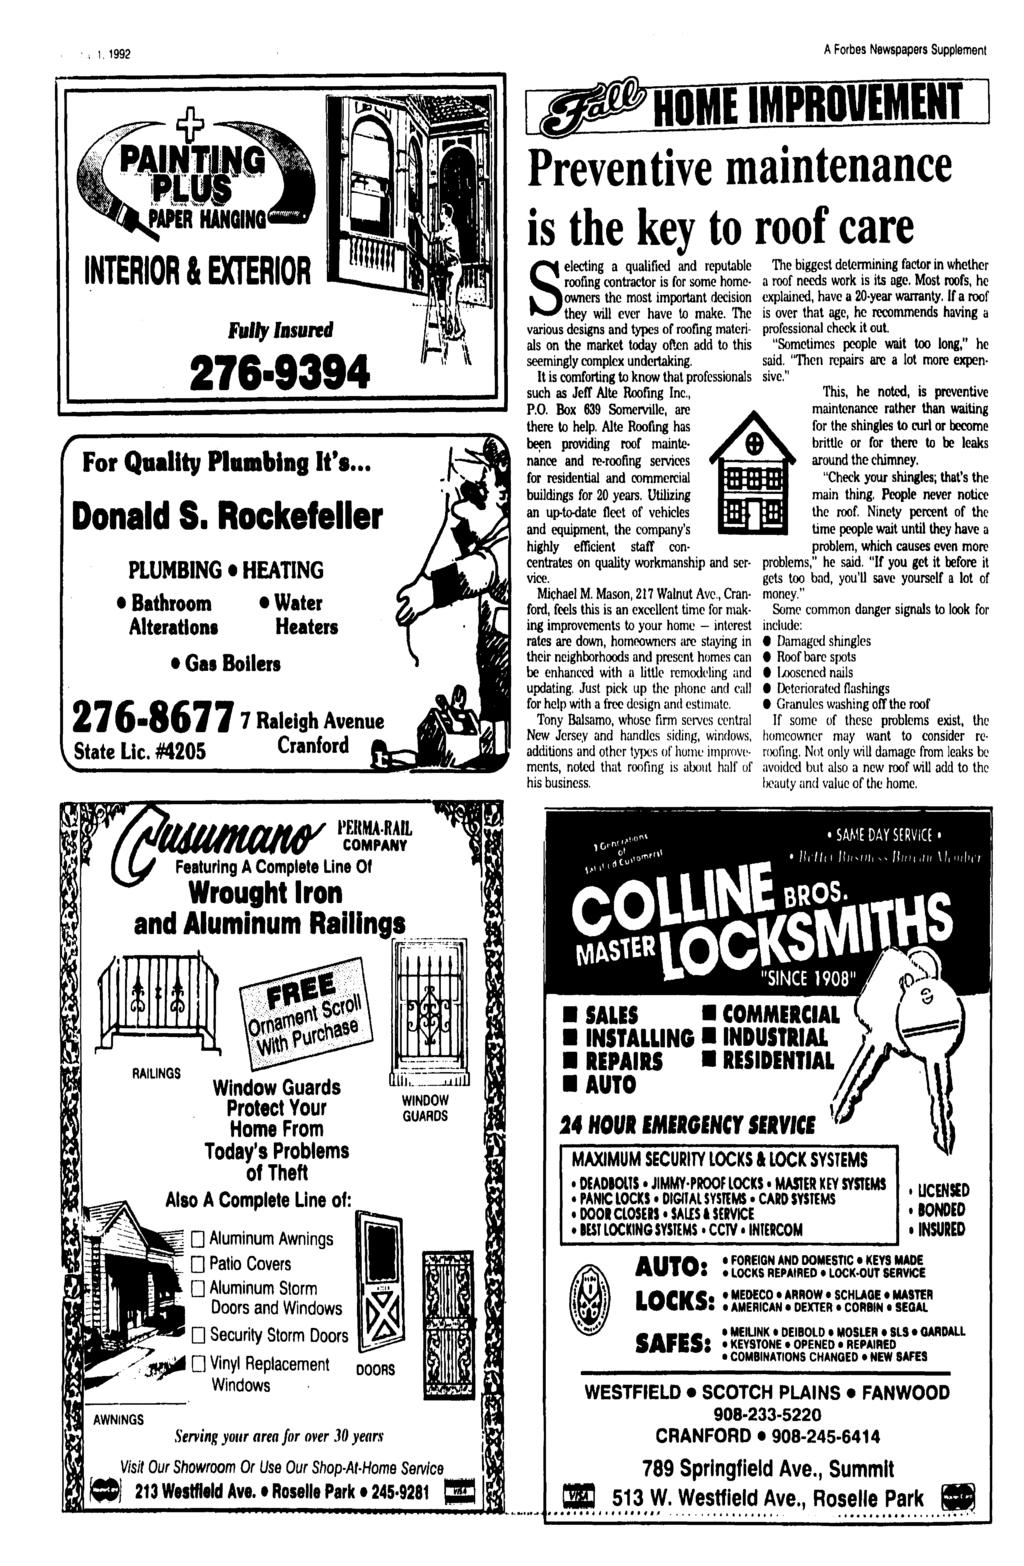 1992 A Forbes Newspapers Supplement HOME MPROVEMENT 11 Preventive maintenance NKRNWUW NTEROR & EXTEROR Fully nsured 276-9394 [ For Quality Plumbing t's Donald S.